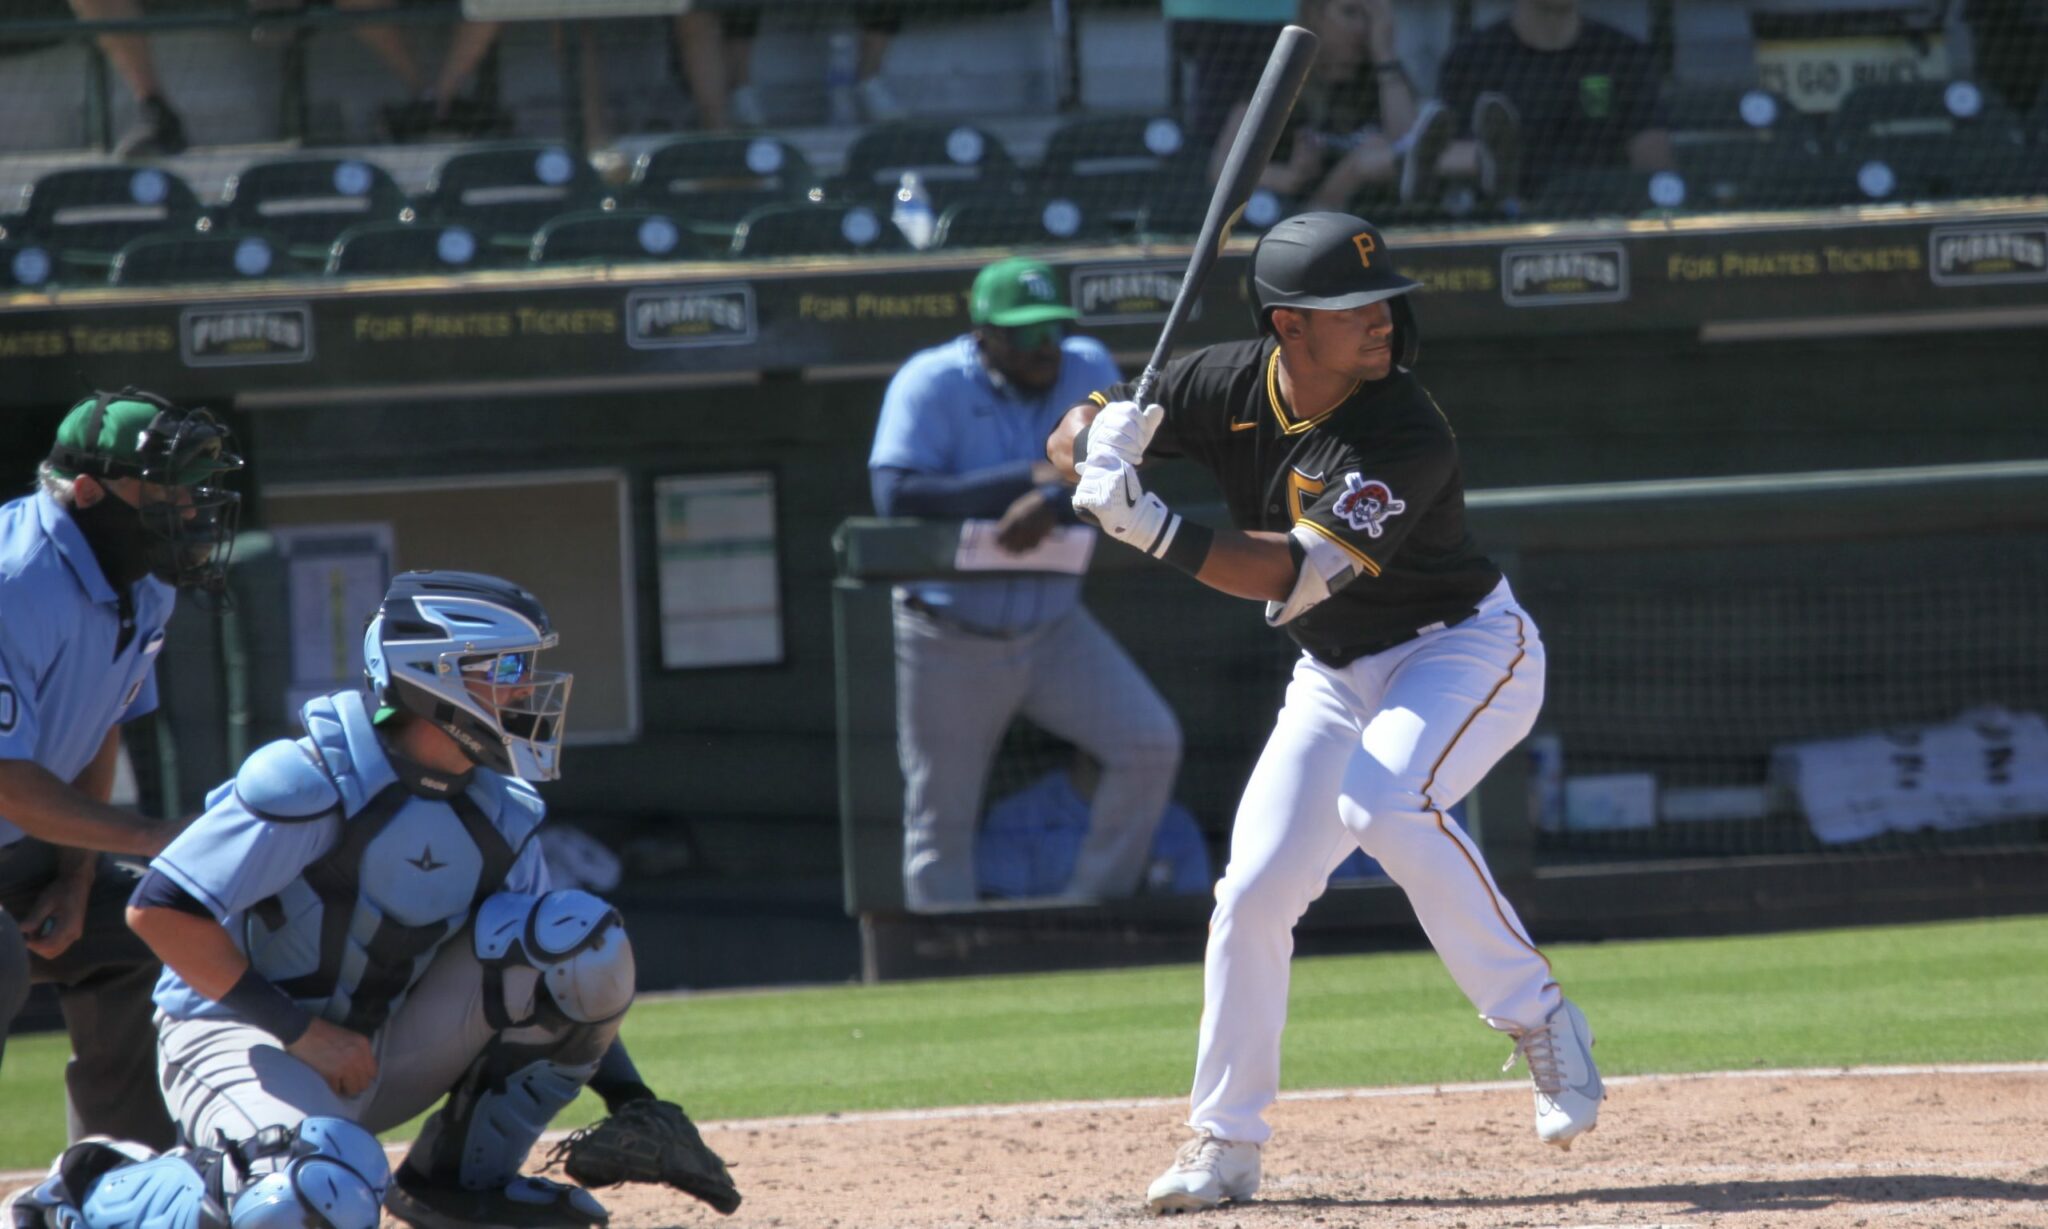 Scouting the System: Breaking Down Nick Gonzales’ Swing